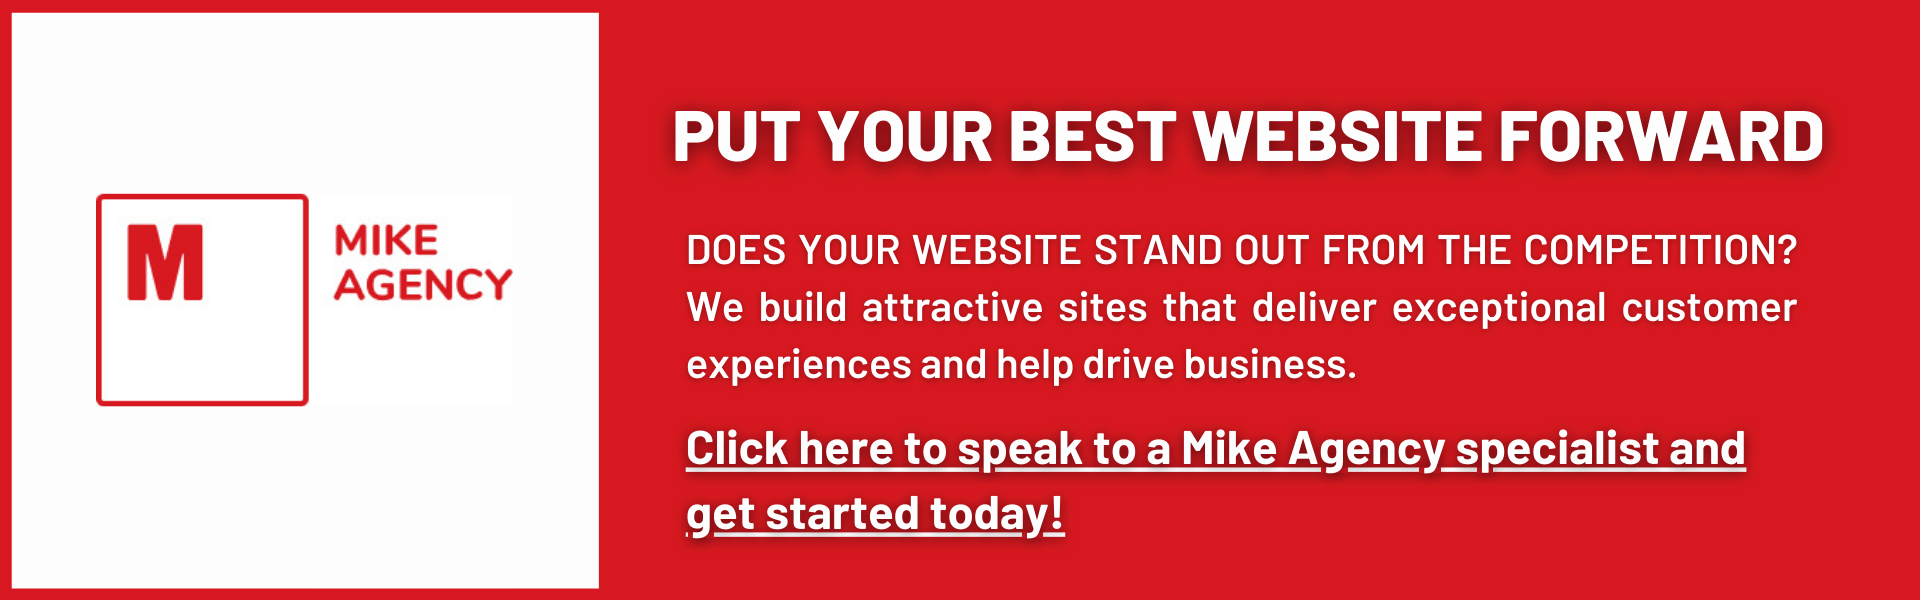 Mike Agency ad for website design